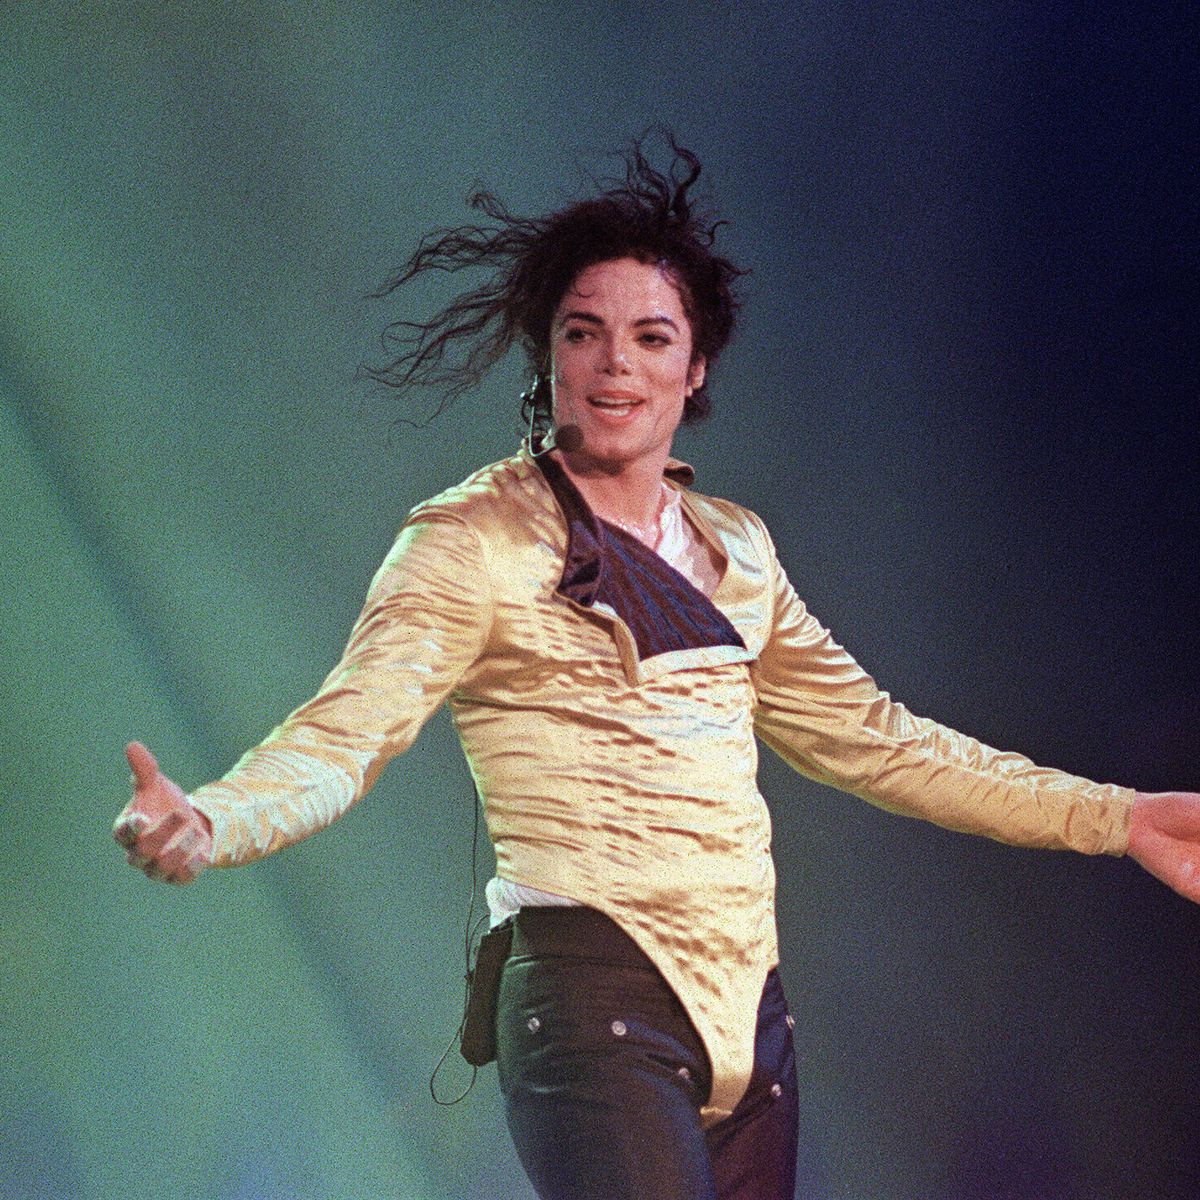 Michael Jackson's Most Infamous Looks: 11 Photos of the Singer's